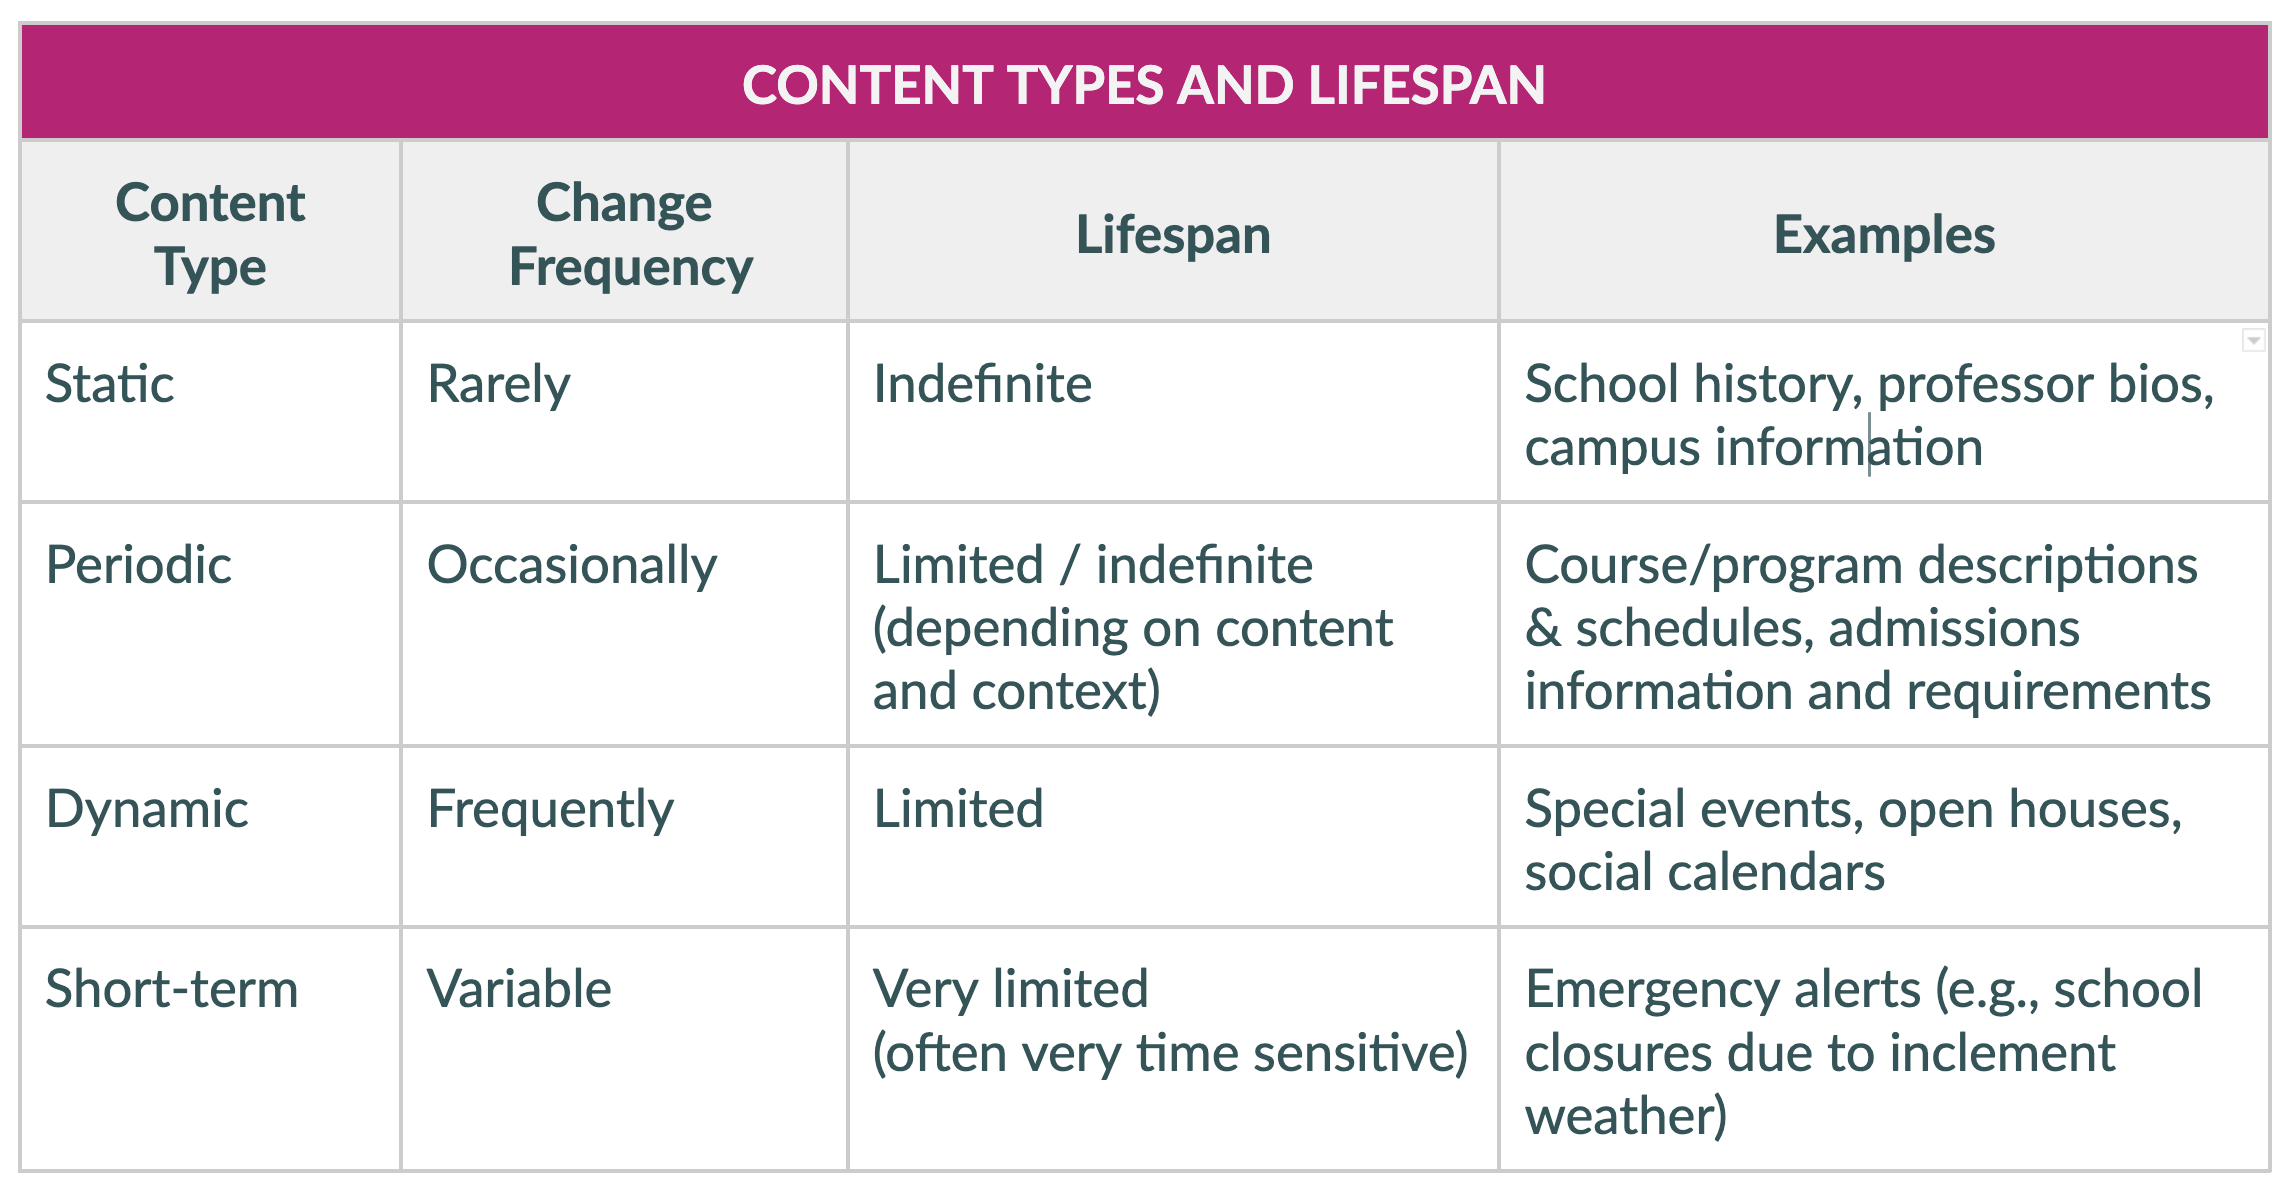 Content type and lifespan